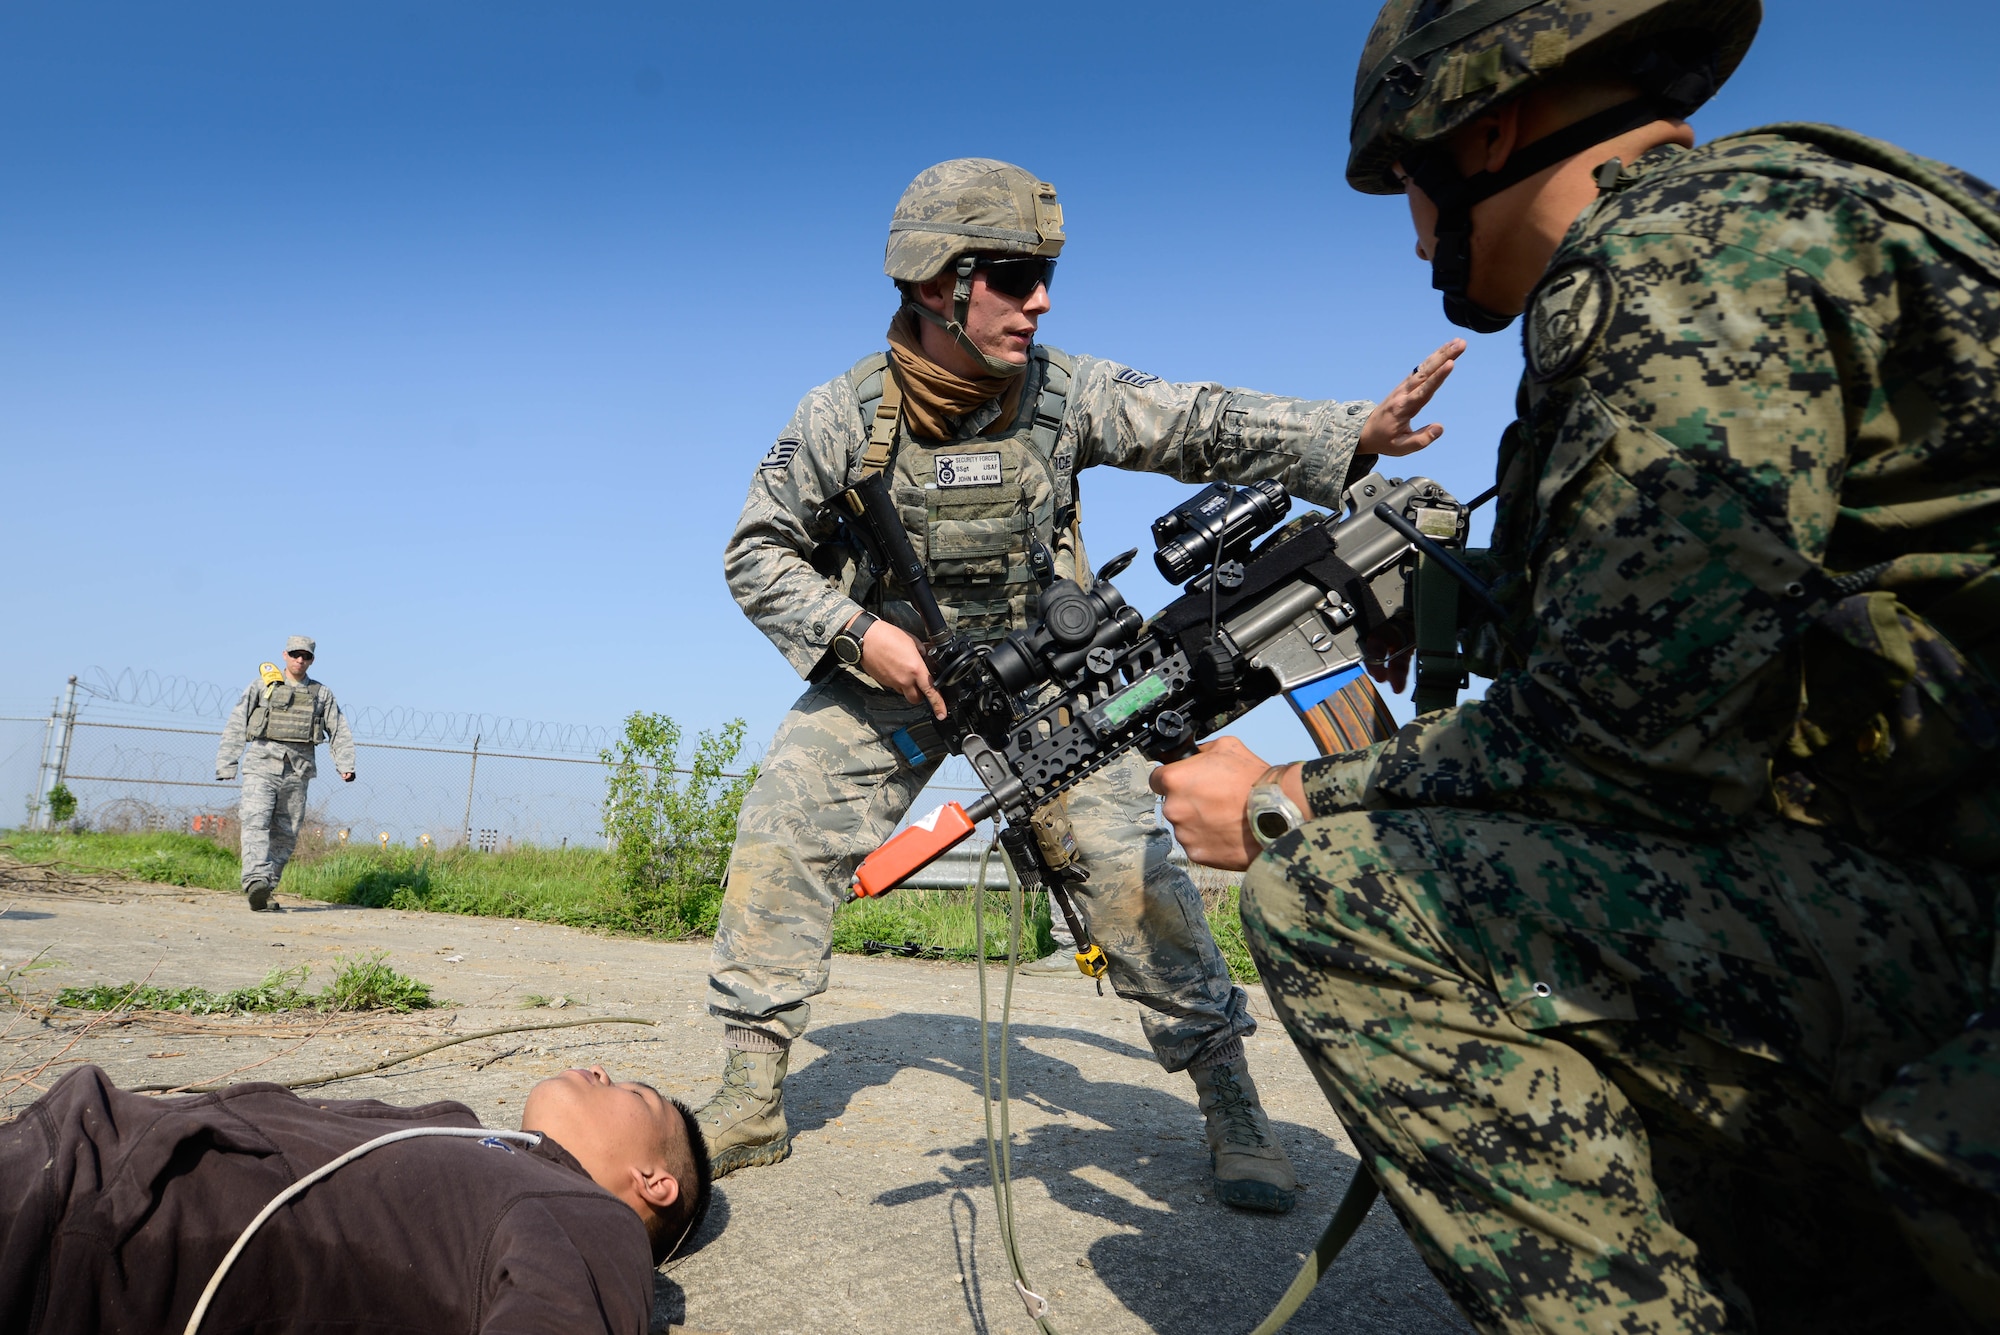 Staff Sgt. John Gavin, center, 51st Security Forces Squadron fire team leader, issues instructions to disarm simulated opposing forces during a training scenario for Beverly Herd 16-01 May 11, 2016, at Osan Air Base, Republic of Korea. BH 16-01 is a week-long readiness exercise for the 51st Fighter Wing that includes a plethora of scenarios like chemical, biological, radioactive, and nuclear response, active shooter and opposing forces. (U.S. Air Force photo by Senior Airman Dillian Bamman/Released)